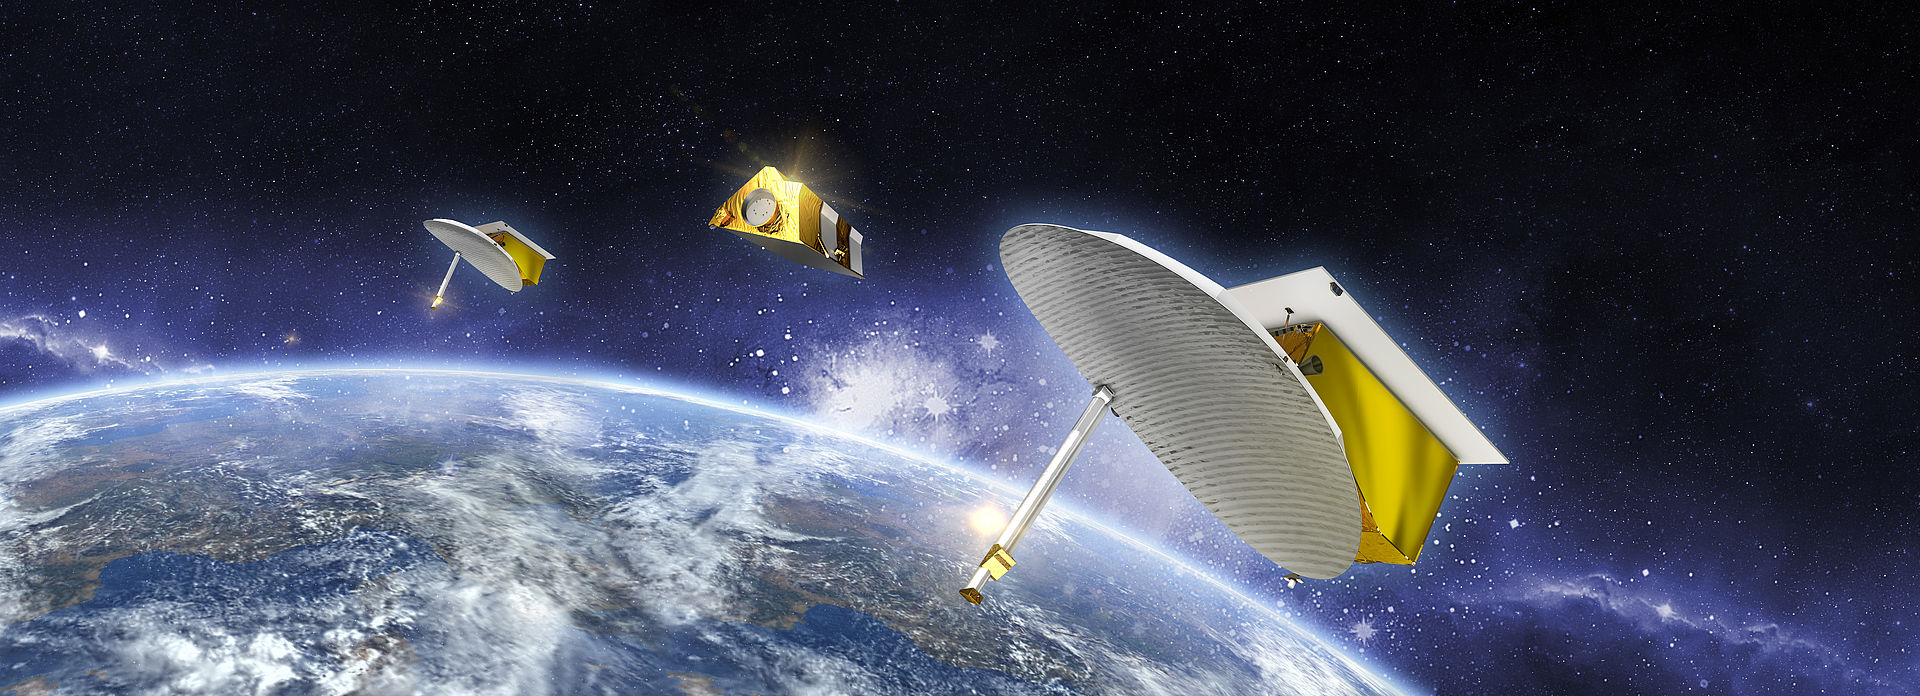 Germany's eyes in space – The SAR-Lupe and SARah satellite reconnaissance systems